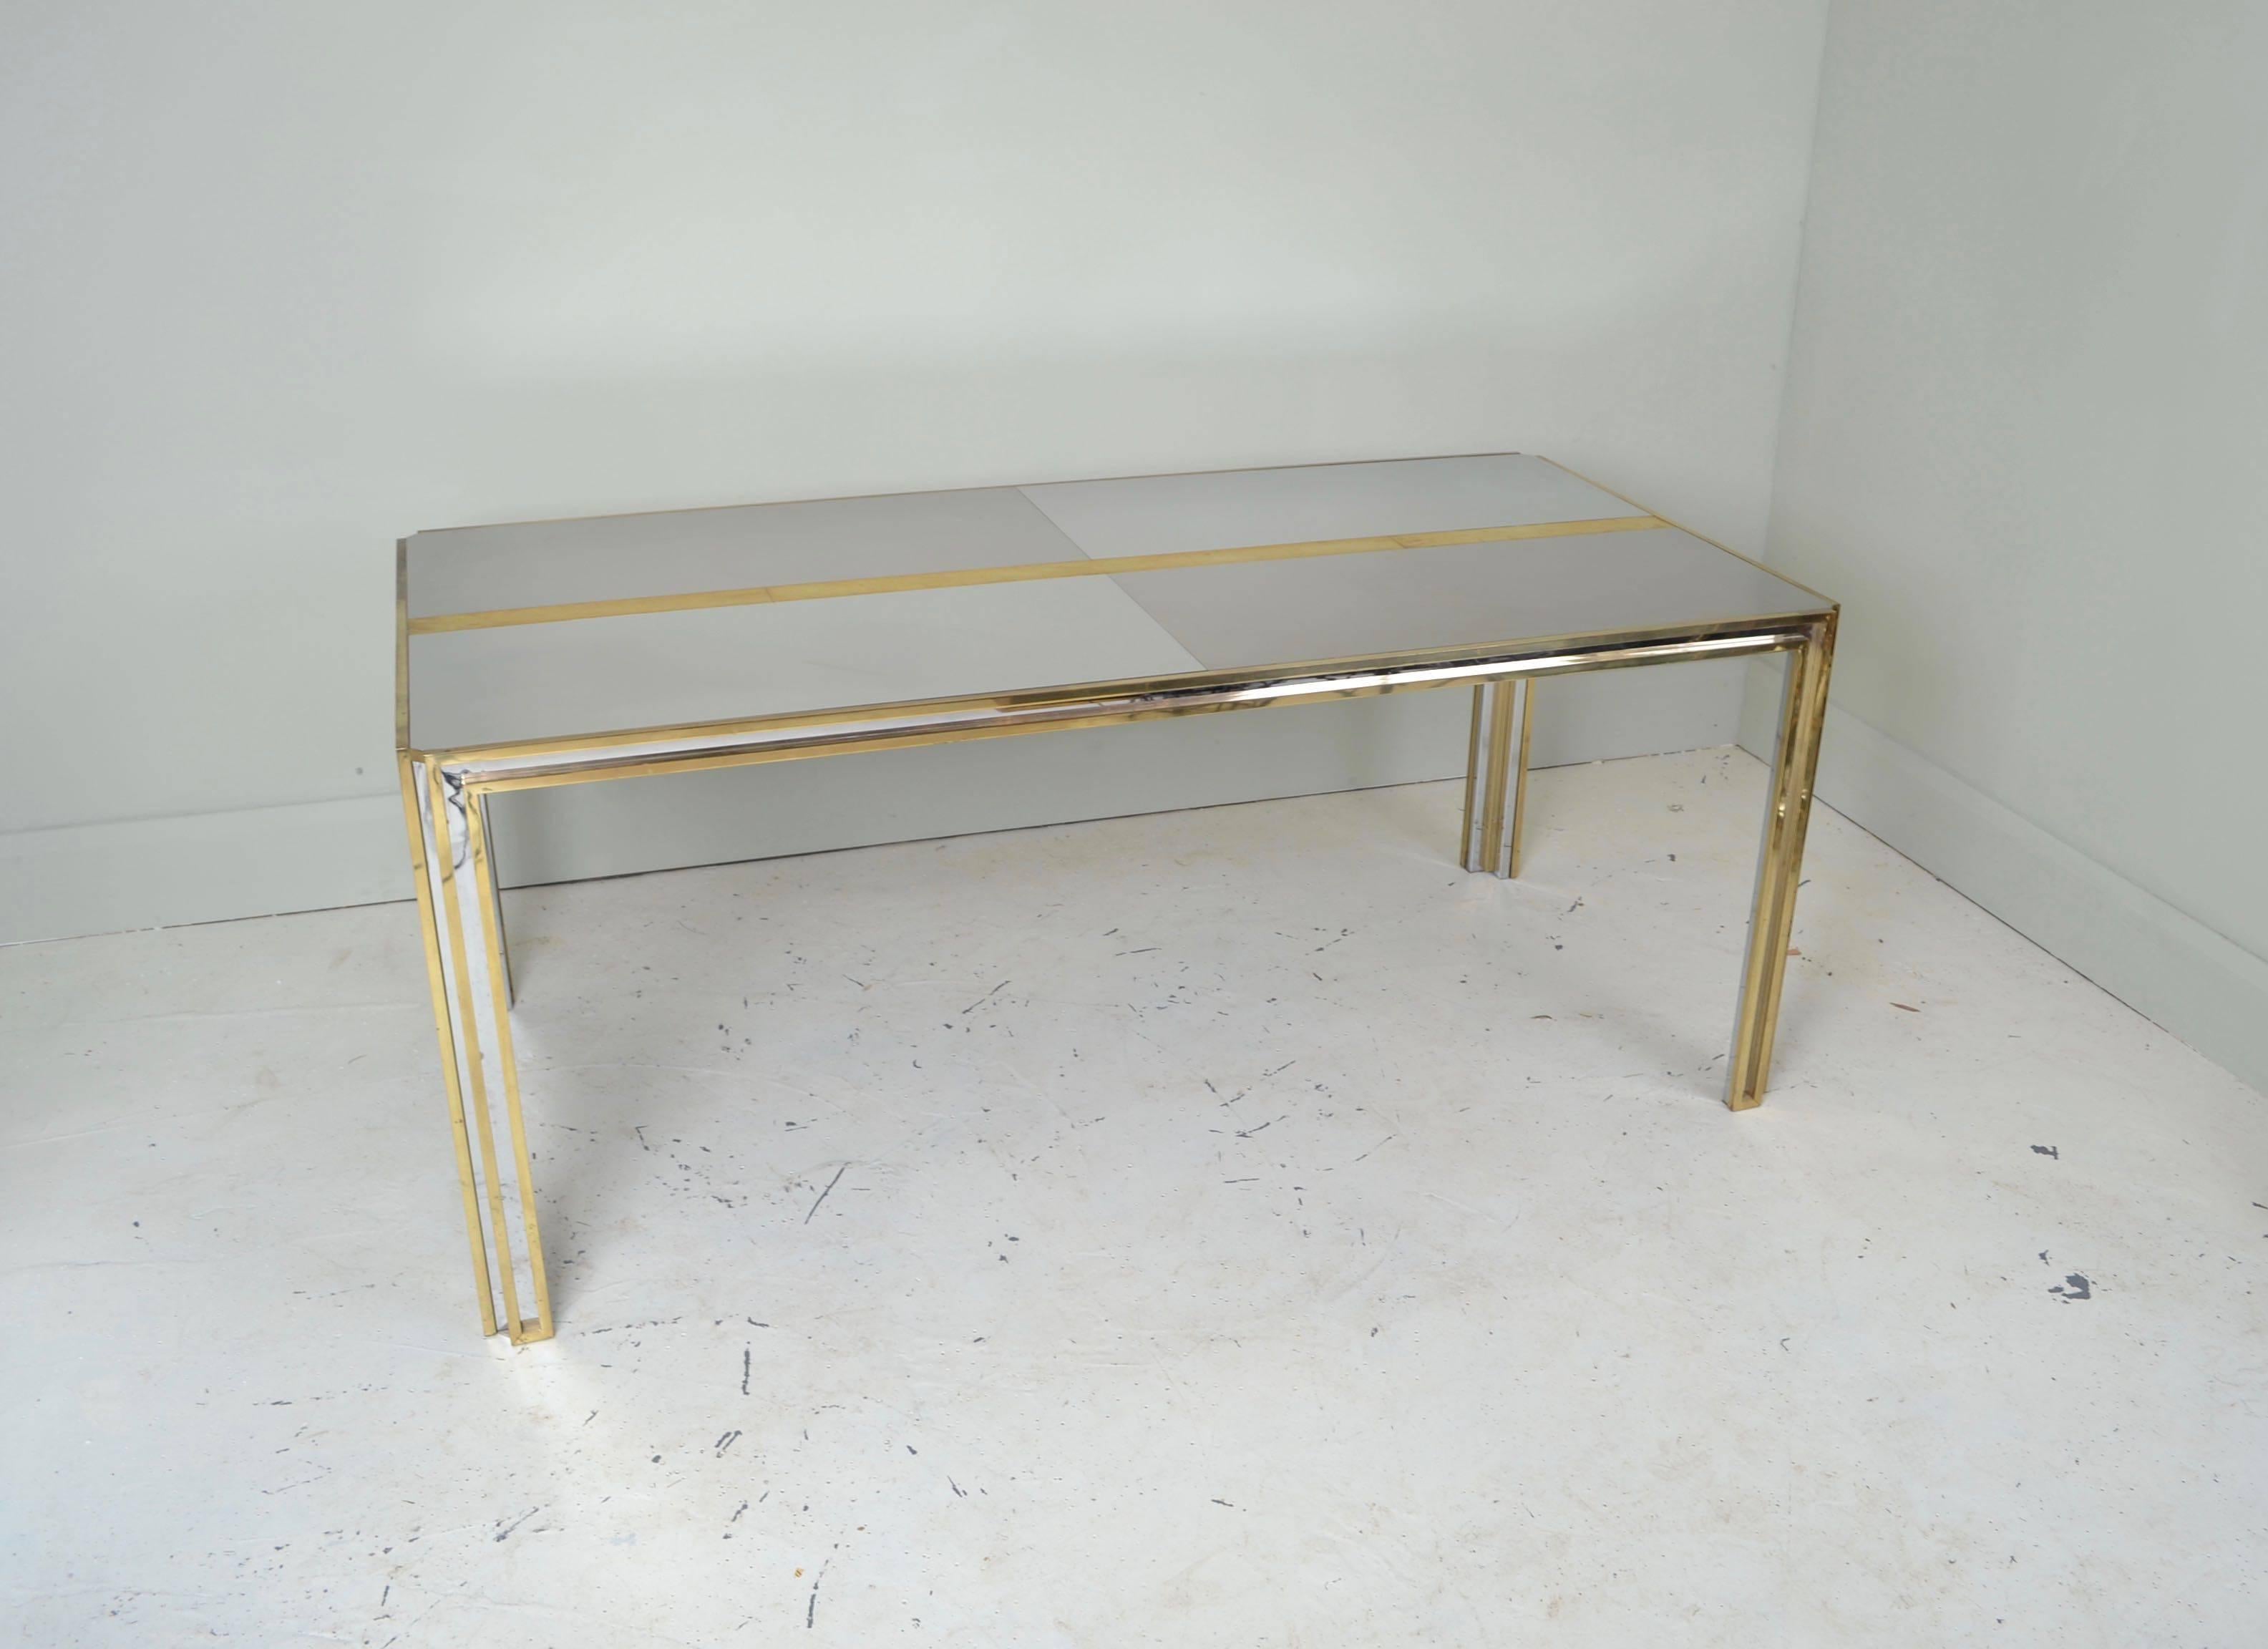 Patchwork stainless steel, brushed steel and brass table 
Manufactured in Italy, circa 1970
Good quality, heavy table with some light surface scratches from use.